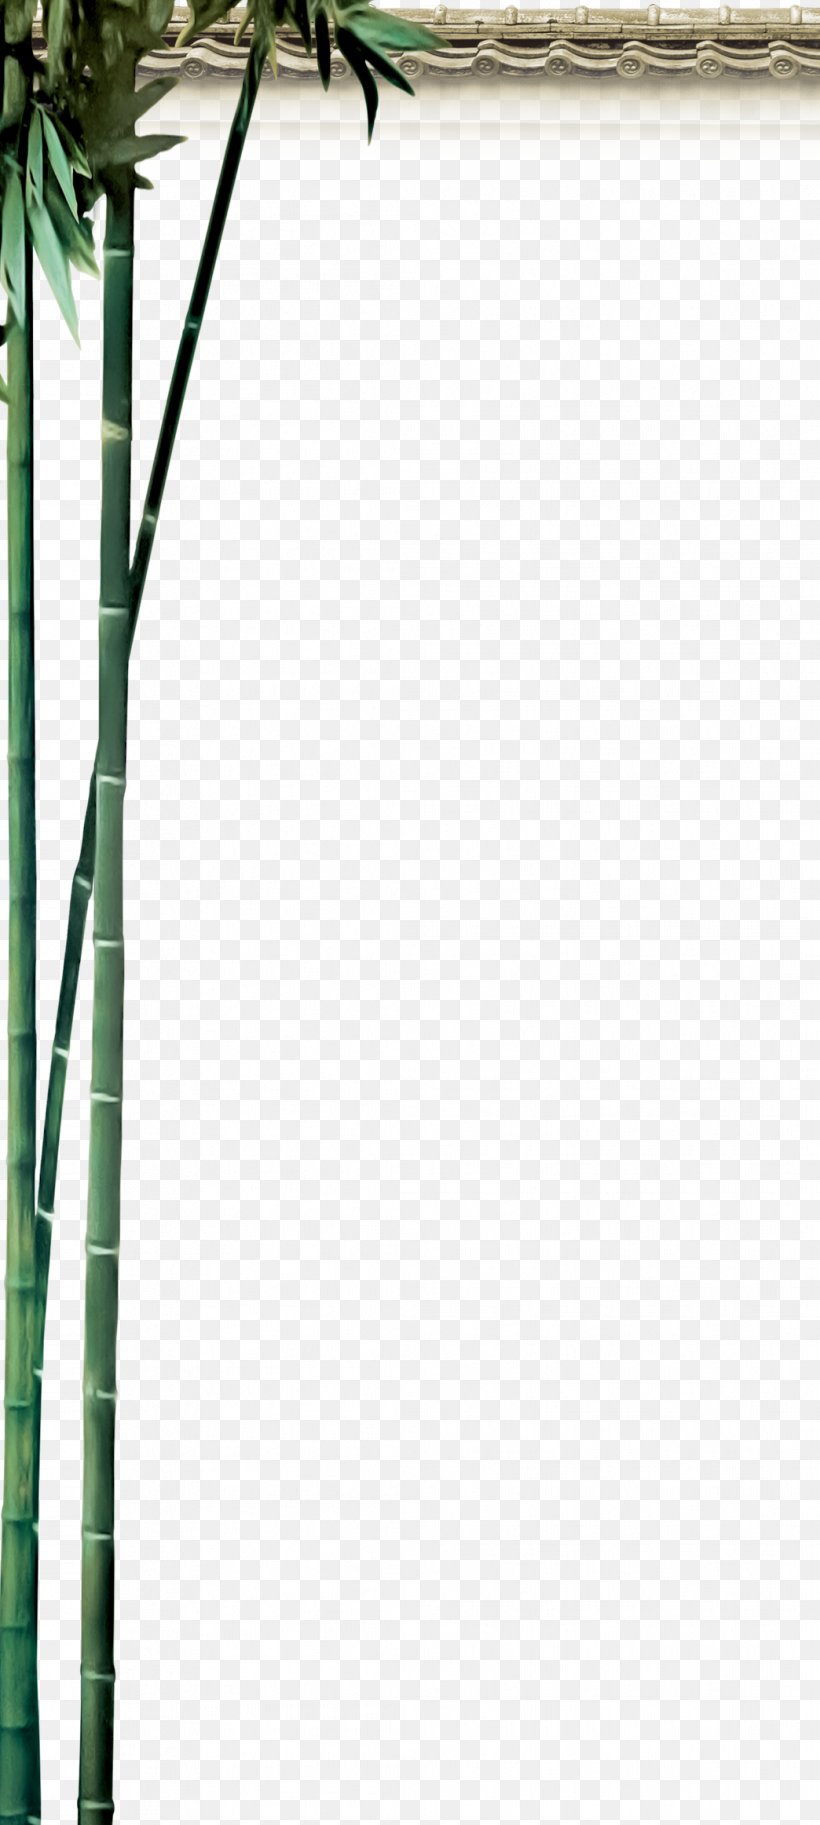 Bamboo Classical Element Pattern, PNG, 1044x2324px, Bamboo, Chemical Element, Classical Element, Grass, Grasses Download Free